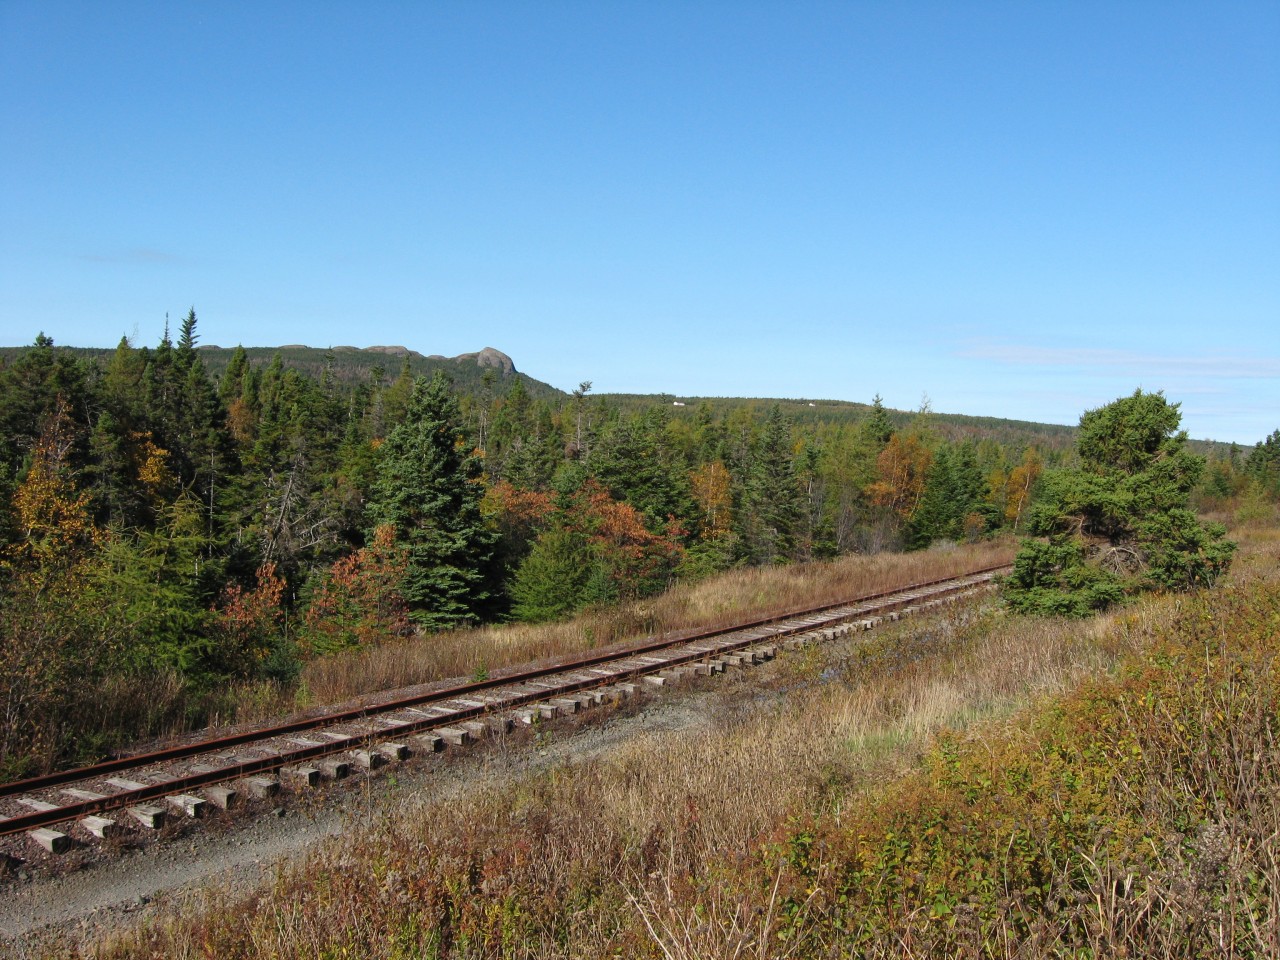 ALL THAT REMAINS. Just west of Avondale, lies the longest remaining stretch of the former Newfoundland Railway mainline. For 1.8 miles, this section of track survived the dismantling program thanks to the hard work of the Avondale Heritage Society who also managed to preserve the Provinces' oldest wooden station in that community. With the backdrop of the Blue Hills, the last official scheduled train to run past this area was Terra Transport Extra 944 East heading to St. John's with five NF210's, two gondolas of scrap metal and a caboose on a rainy September 29, 1988. A testament to the track crews is evident in the remarkable condition of the line a quarter of a century later, considering that no maintenance has been since that time.